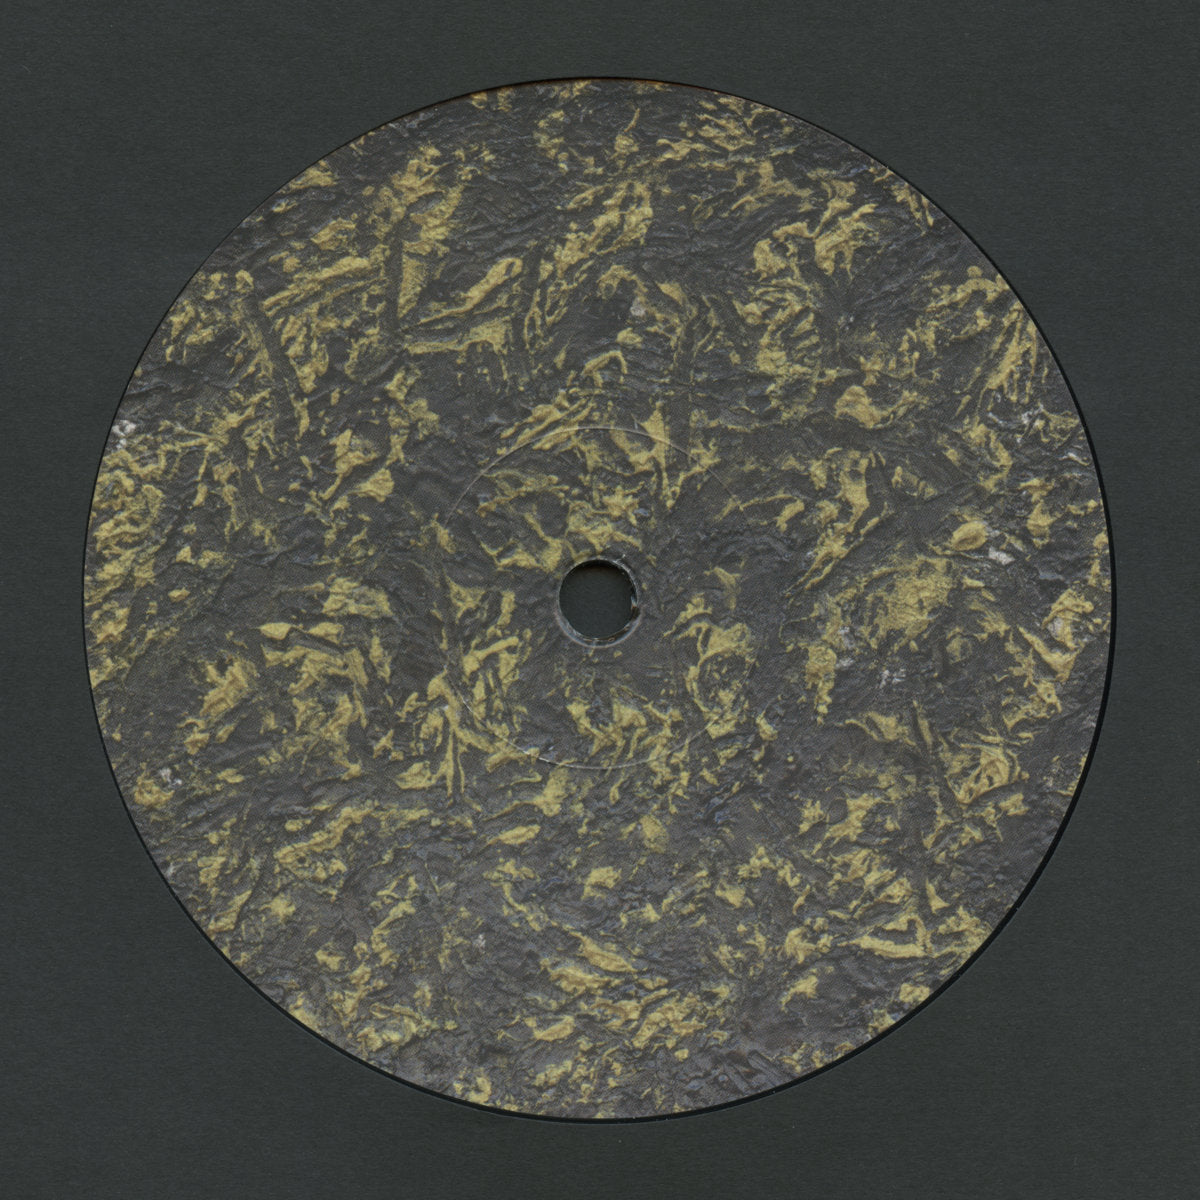 Zenker Brothers 'Mad System' 12"